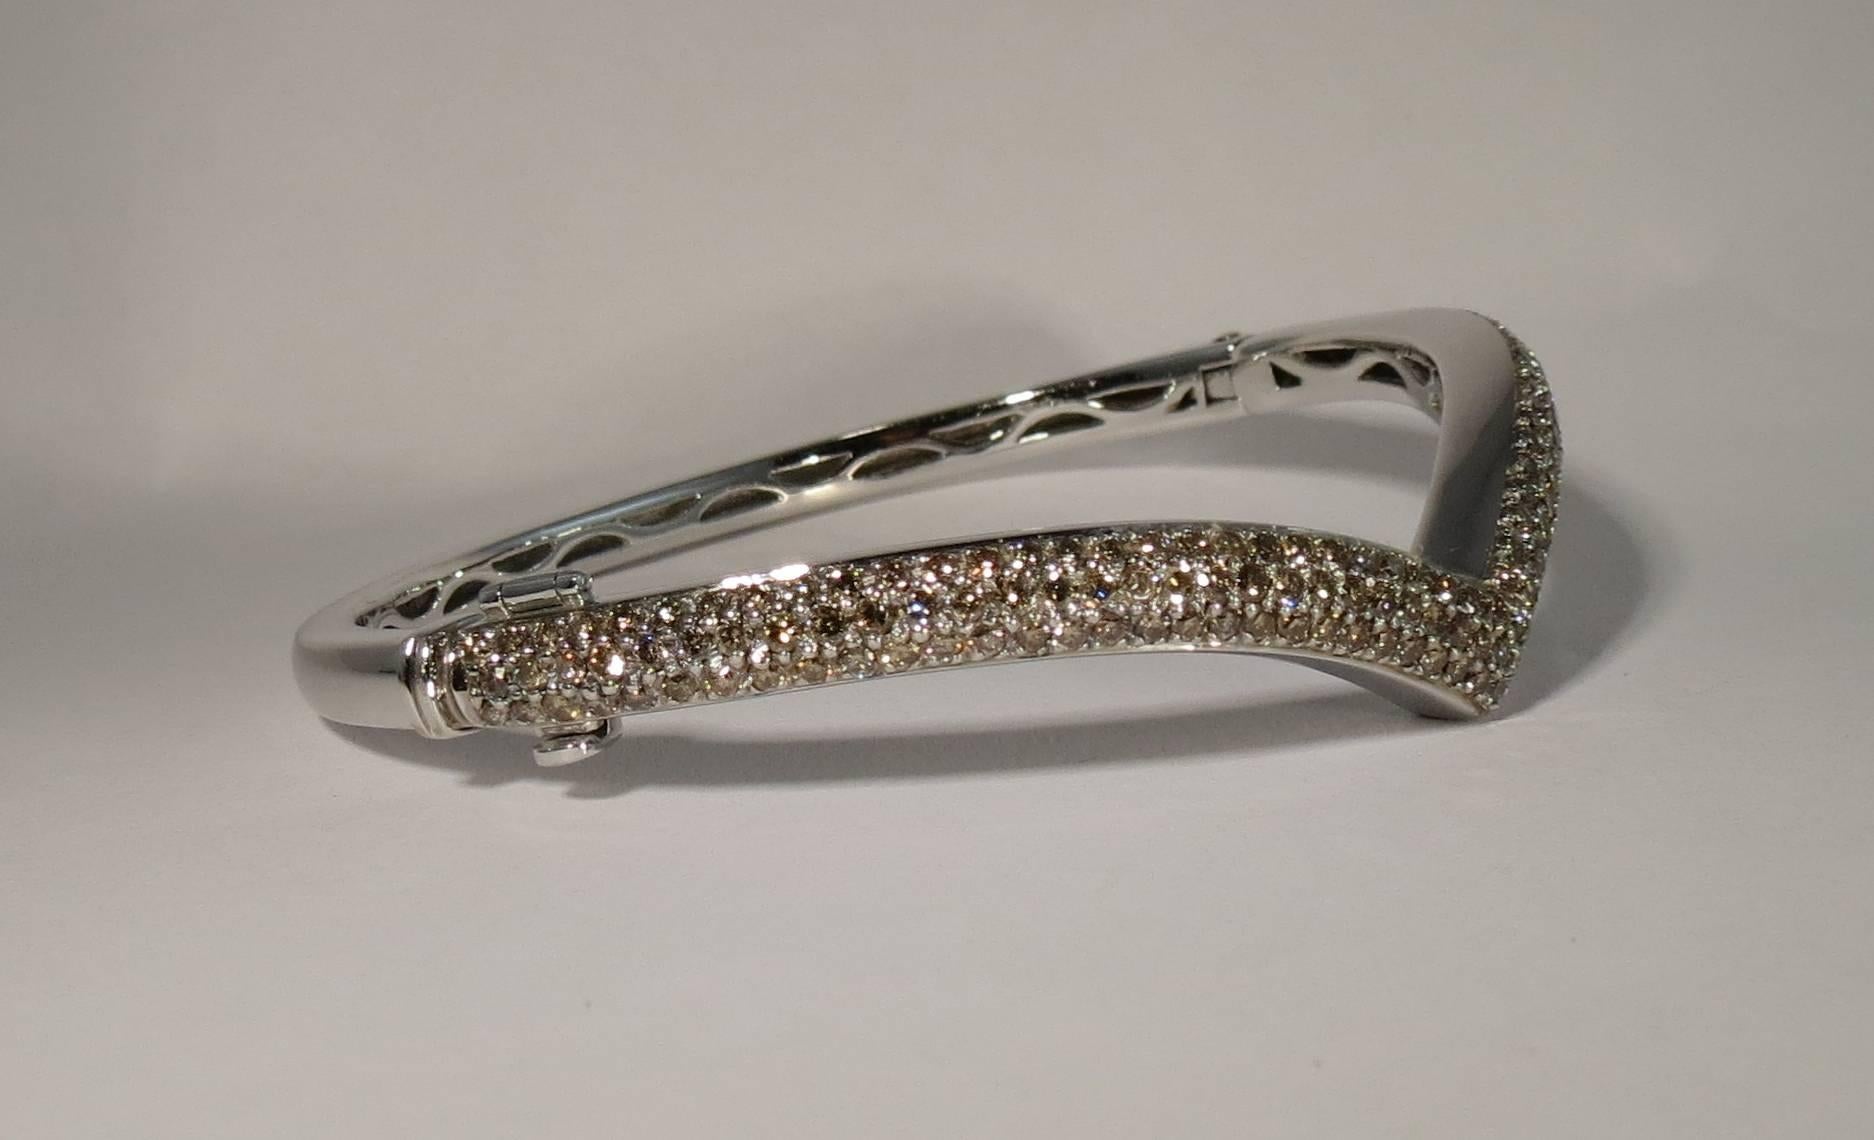 Jona design collection, hand crafted in Italy, 18 karat white gold bangle bracelet featuring 2.65 carats of champagne diamonds pavé (165 pieces).

All Jona jewelry is new and has never been previously owned or worn. Each item will arrive at your